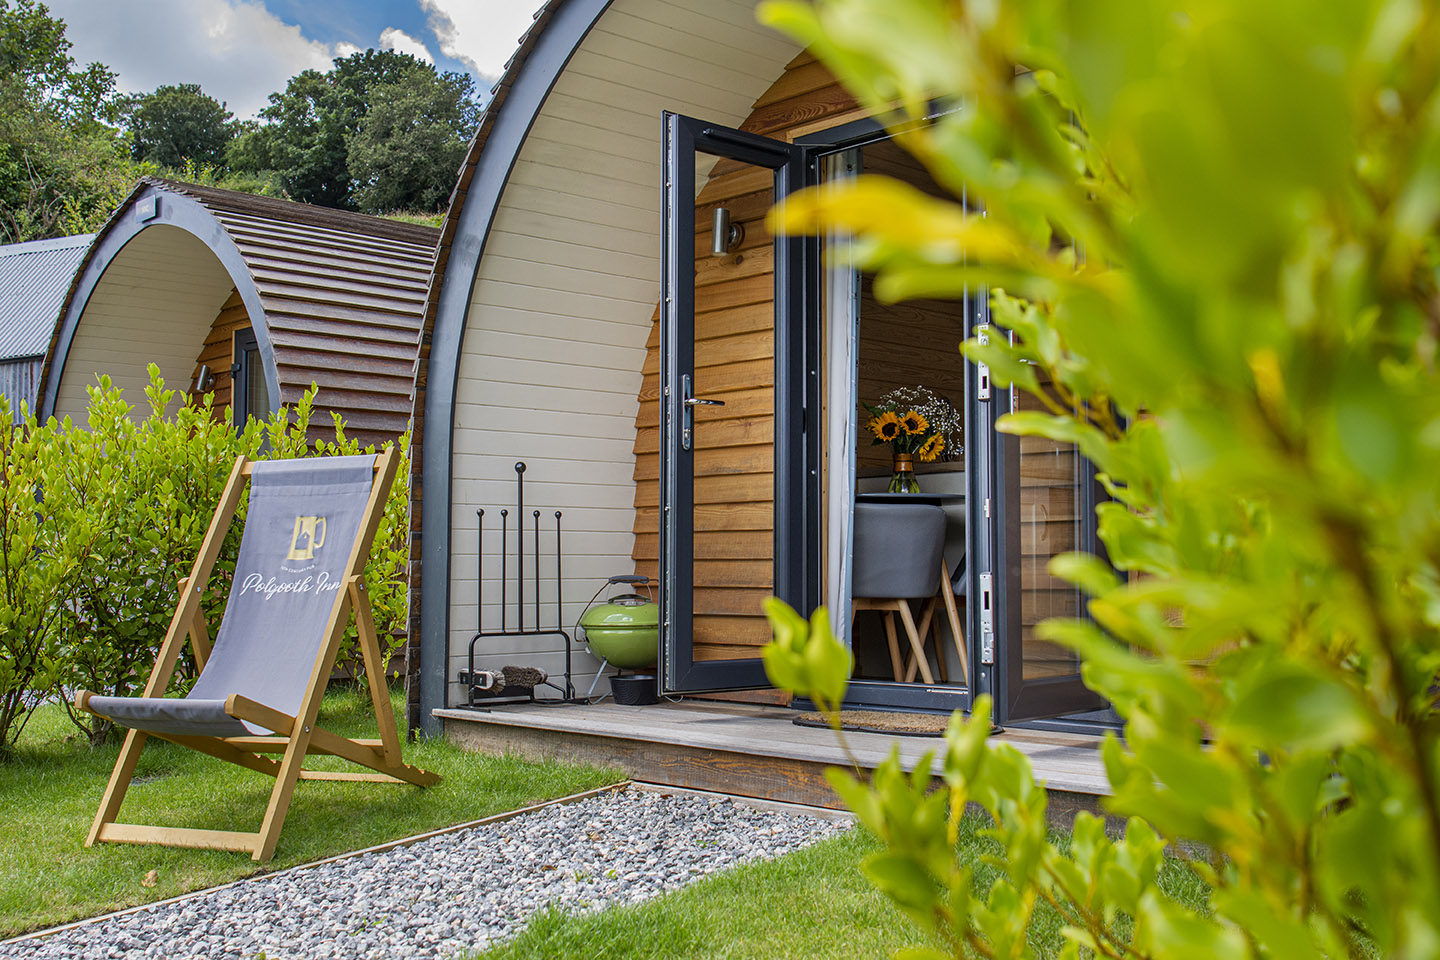 Image shows the front view of the garden glamping pods with greenery around it, and a deckchair on the lawn